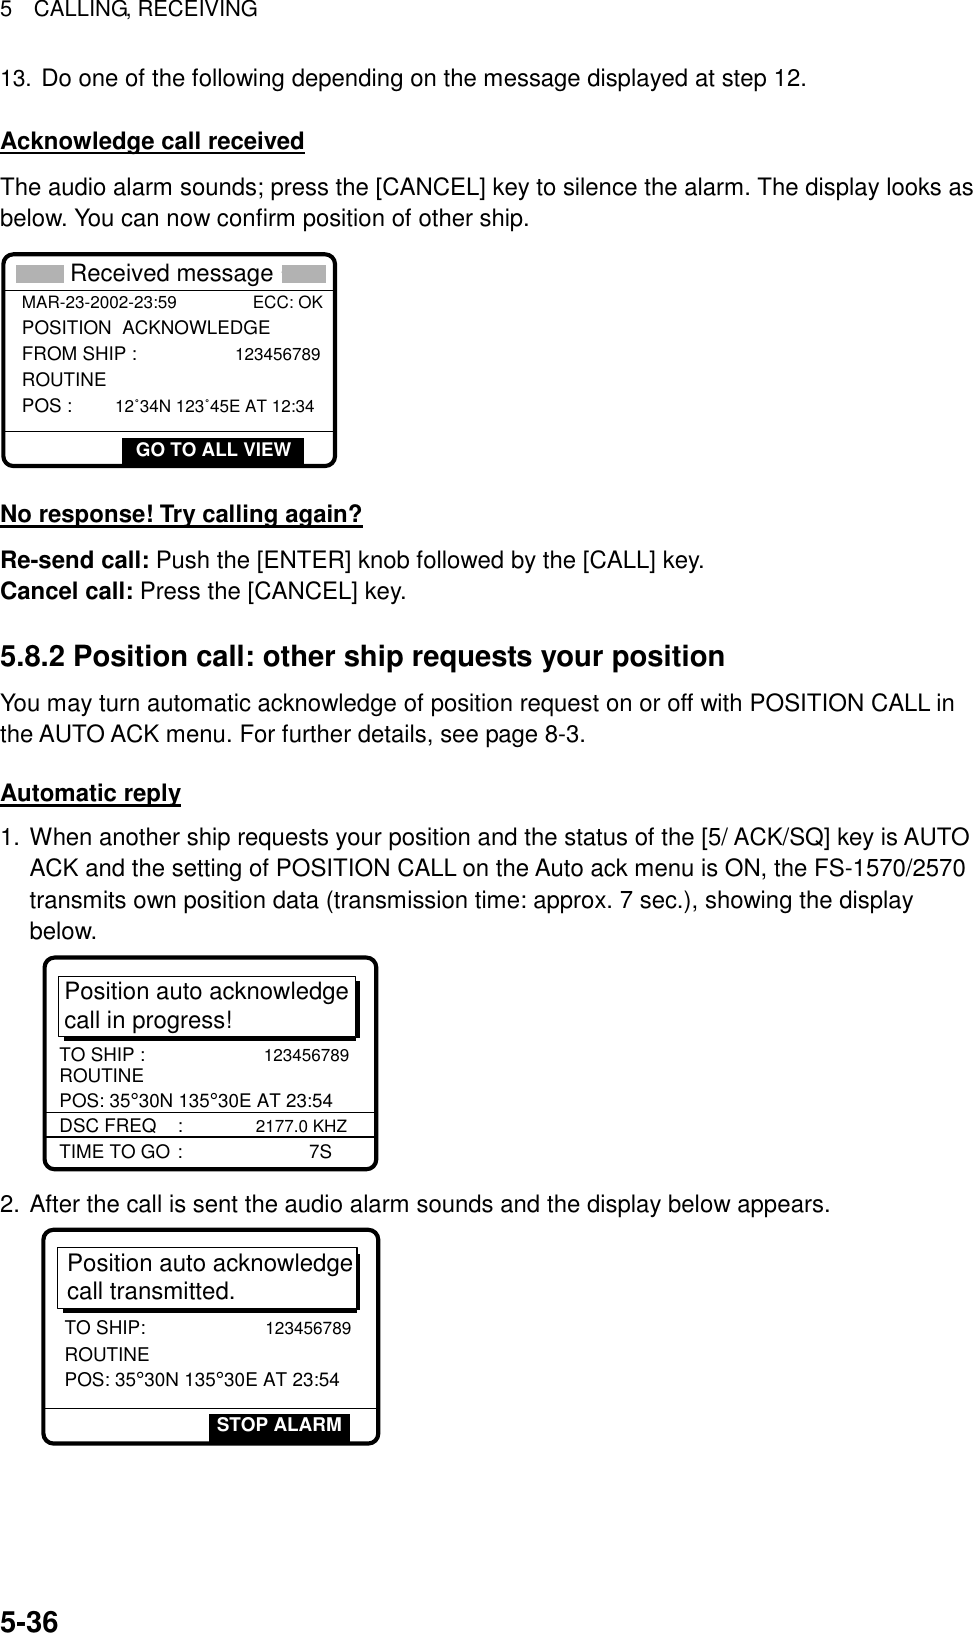 5  CALLING, RECEIVING  5-3613. Do one of the following depending on the message displayed at step 12.  Acknowledge call received The audio alarm sounds; press the [CANCEL] key to silence the alarm. The display looks as below. You can now confirm position of other ship. POSITION  ACKNOWLEDGE FROM SHIP :               123456789ROUTINE POS :       12˚34N 123˚45E AT 12:34 * Received message *GO TO ALL VIEWMAR-23-2002-23:59                ECC: OK  No response! Try calling again? Re-send call: Push the [ENTER] knob followed by the [CALL] key. Cancel call: Press the [CANCEL] key.  5.8.2 Position call: other ship requests your position You may turn automatic acknowledge of position request on or off with POSITION CALL in the AUTO ACK menu. For further details, see page 8-3.  Automatic reply 1. When another ship requests your position and the status of the [5/ ACK/SQ] key is AUTO ACK and the setting of POSITION CALL on the Auto ack menu is ON, the FS-1570/2570 transmits own position data (transmission time: approx. 7 sec.), showing the display below.  Position auto acknowledgecall in progress!TIME TO GO :      7SDSC FREQ    : 2177.0 KHZTO SHIP :                     123456789 ROUTINEPOS: 35°30N 135°30E AT 23:54 2. After the call is sent the audio alarm sounds and the display below appears. Position auto acknowledge call transmitted.TO SHIP:                     123456789ROUTINEPOS: 35°30N 135°30E AT 23:54STOP ALARM 